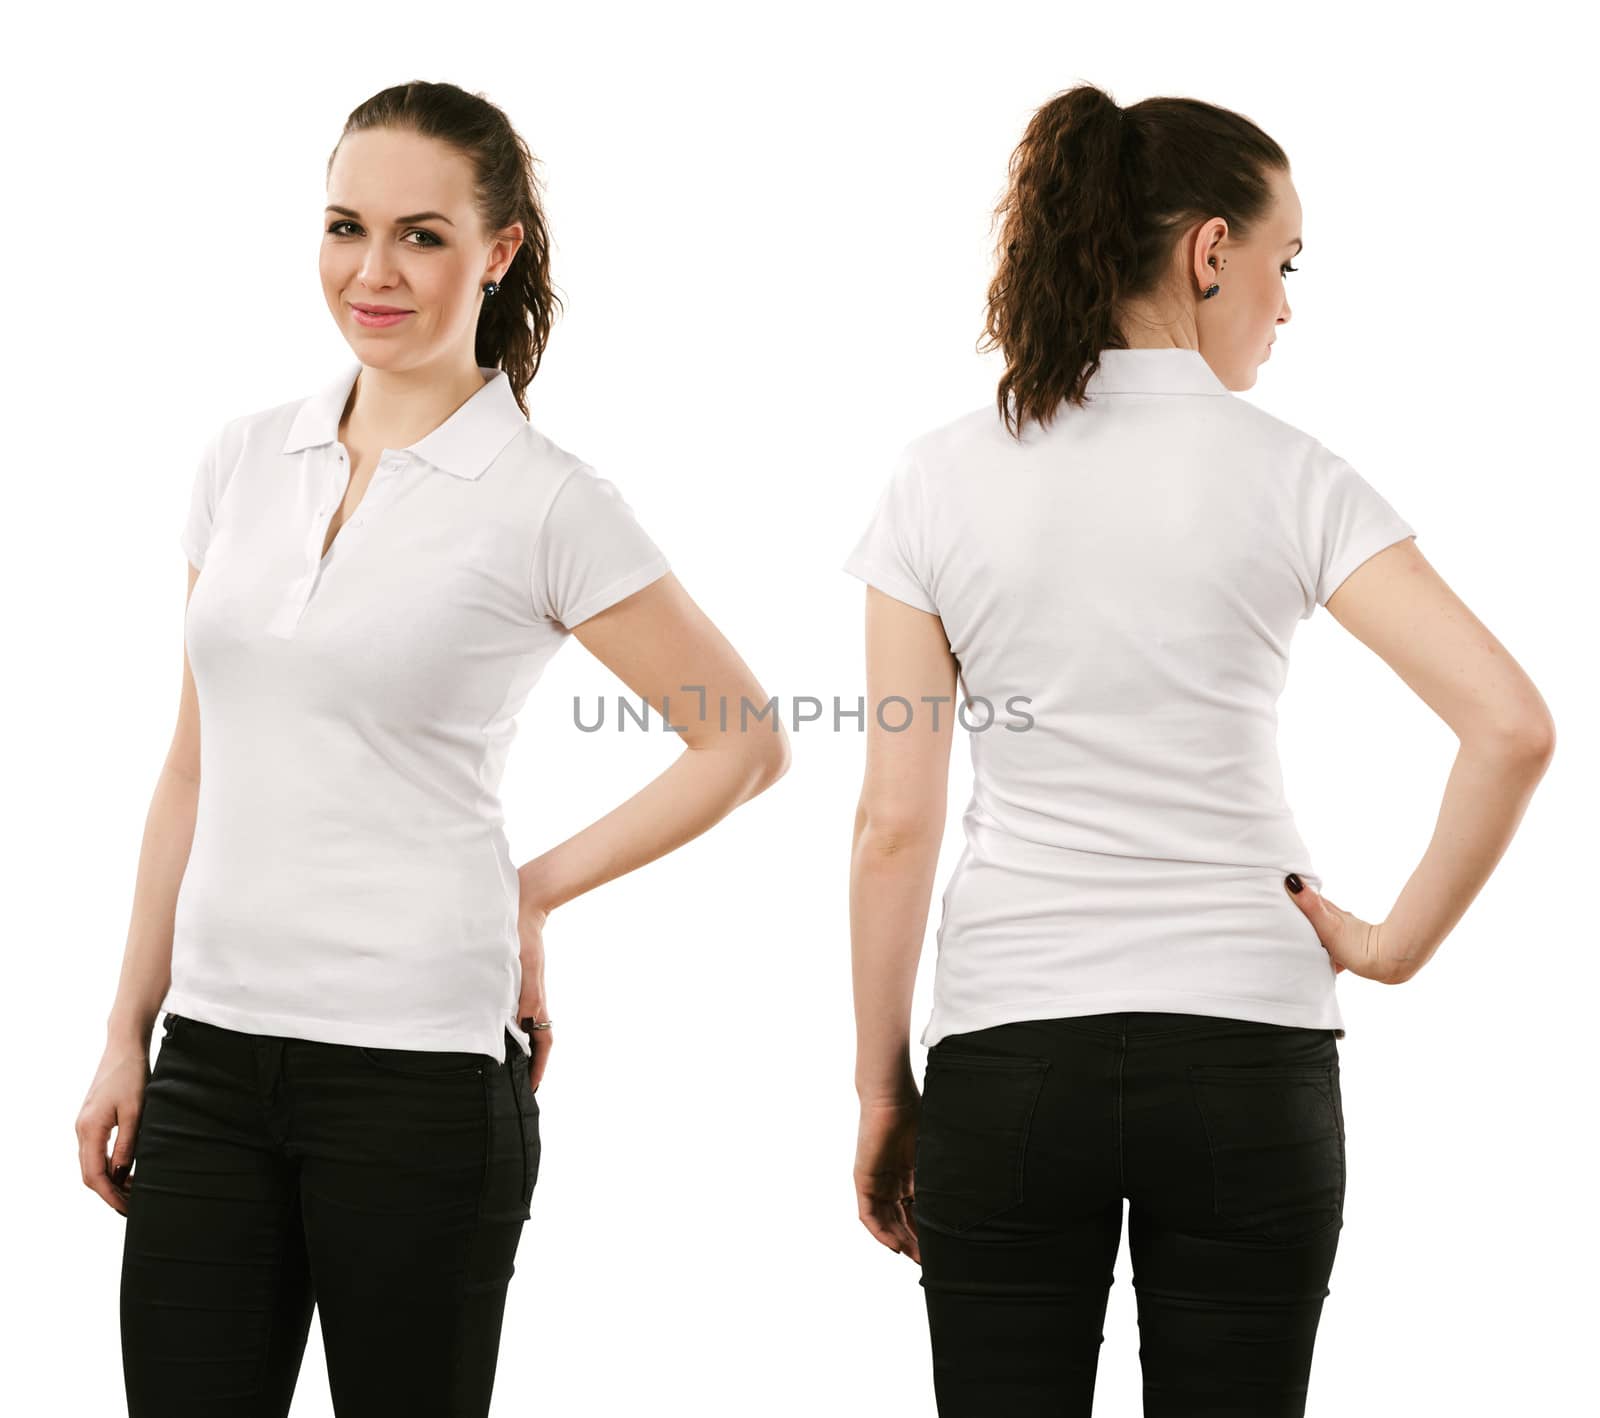 Smiling woman wearing blank white polo shirt by sumners